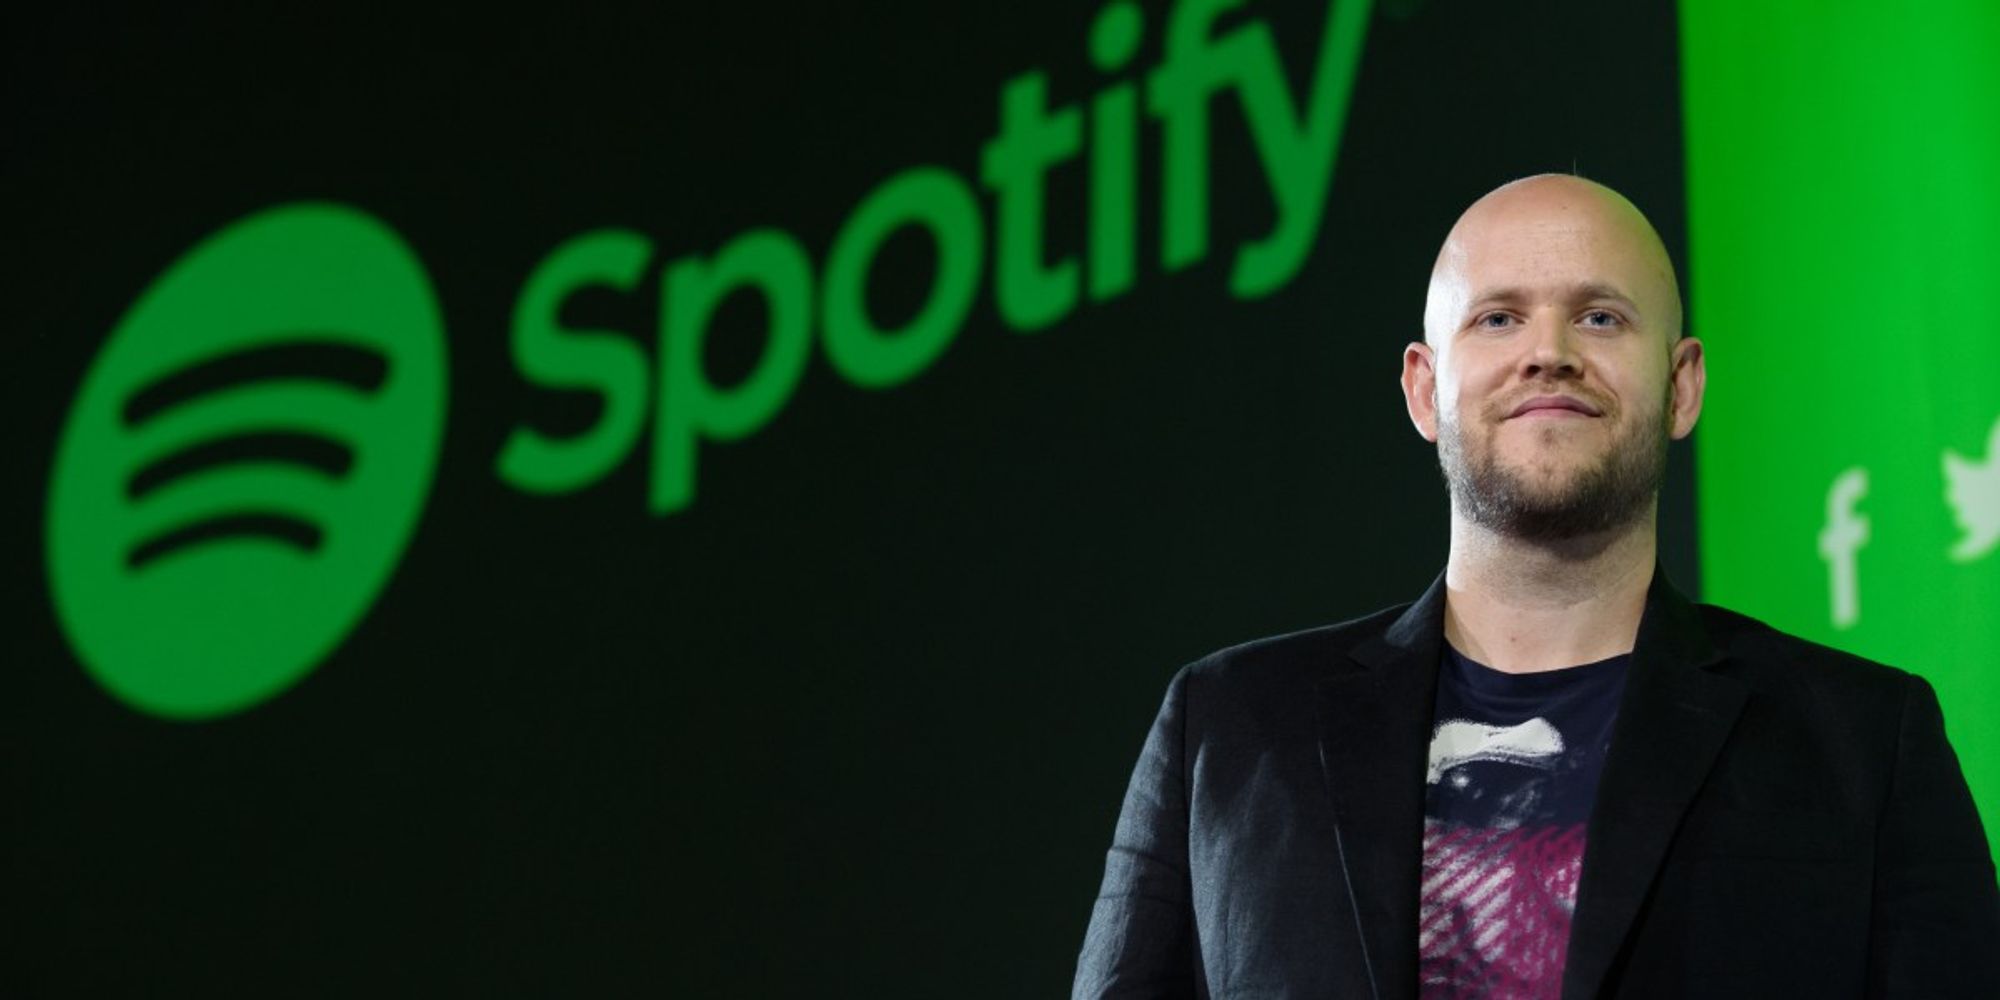 Spotify implemented a 'Work From Anywhere' policy. Turnover dropped